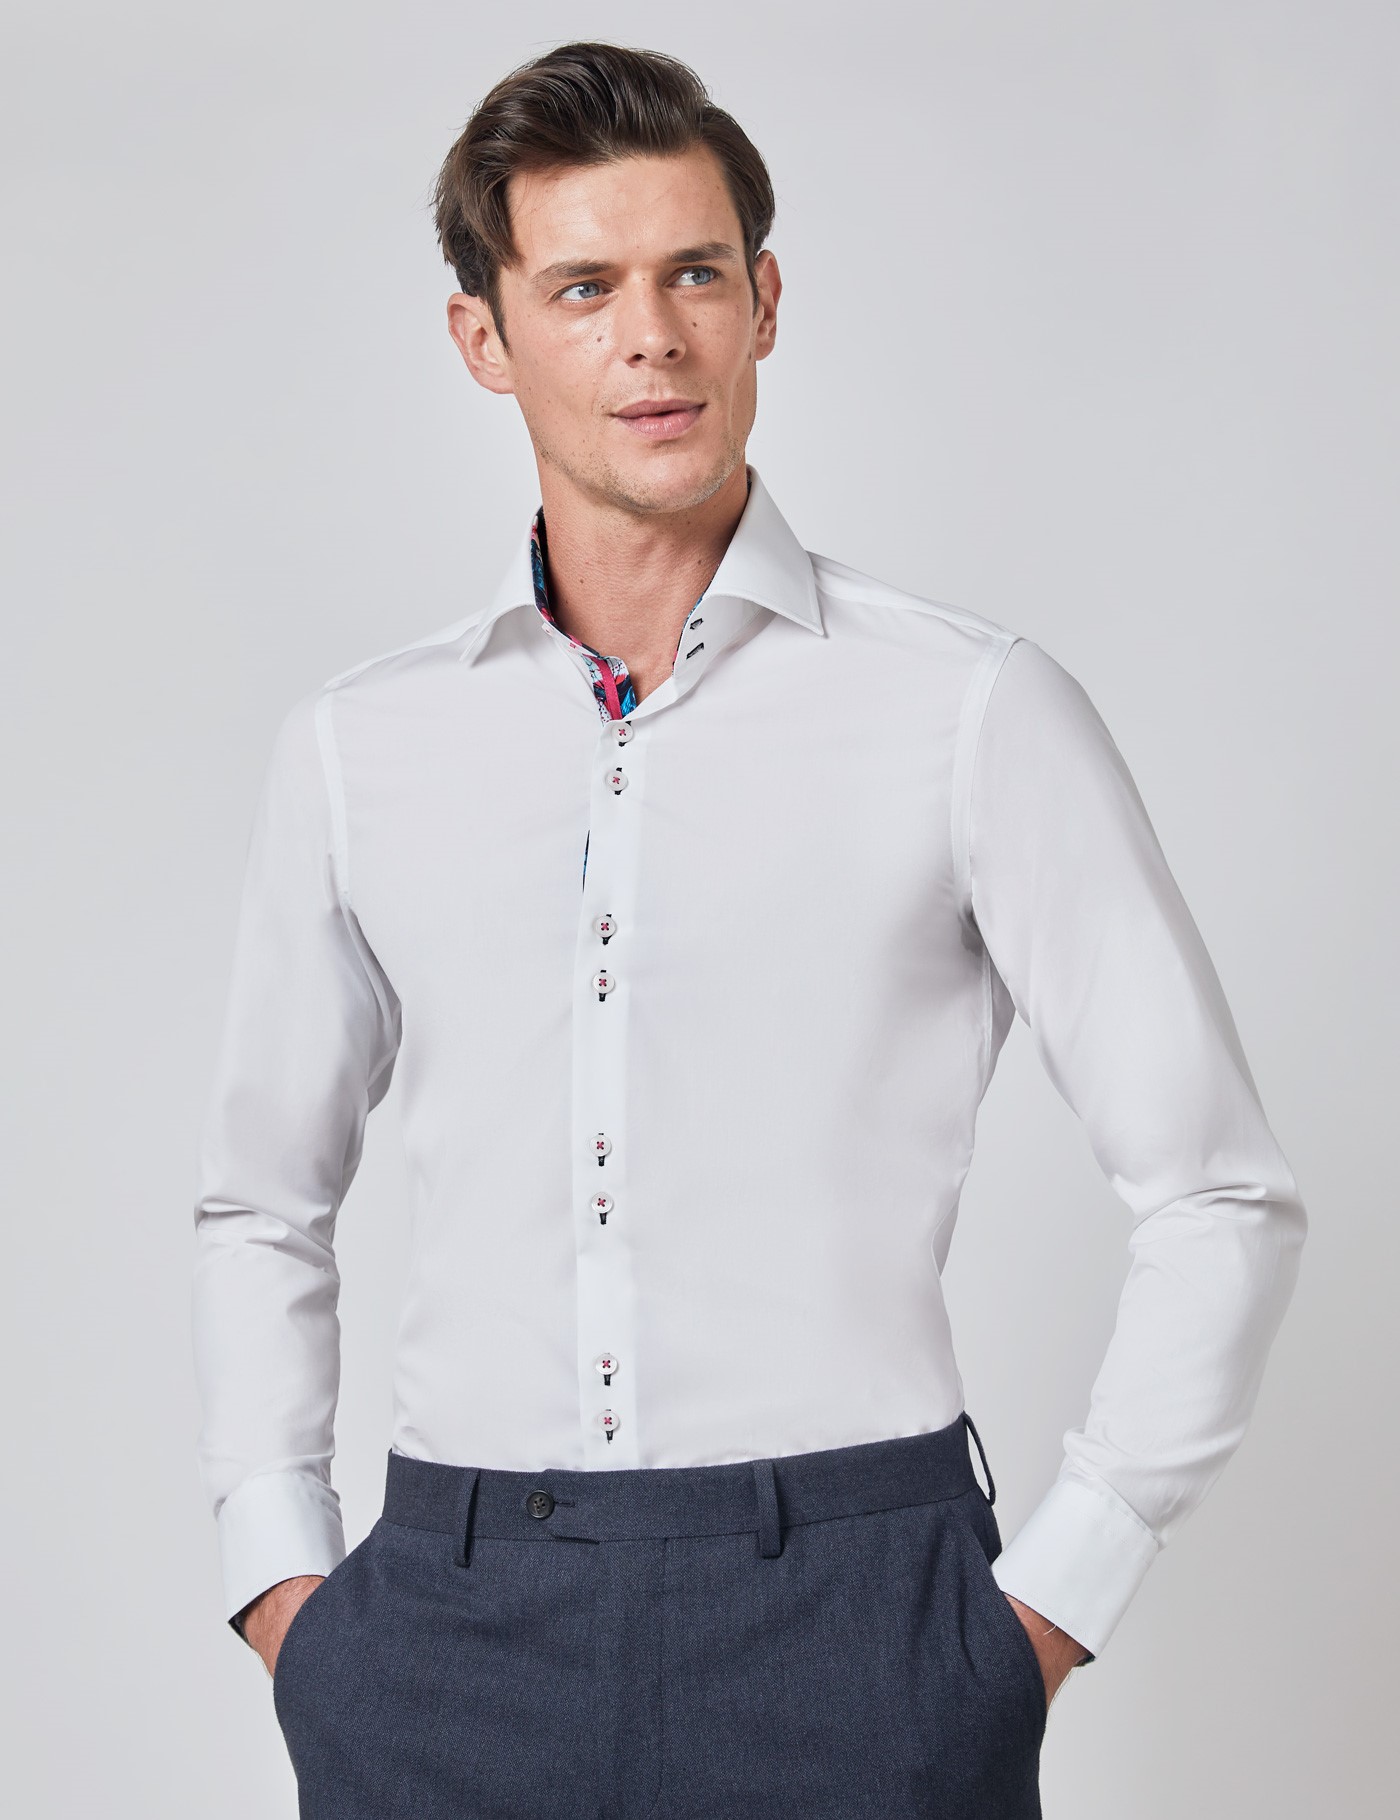 Brandon Plain Men's Slim Fit Shirt with Single Cuff and Contrast Detail ...